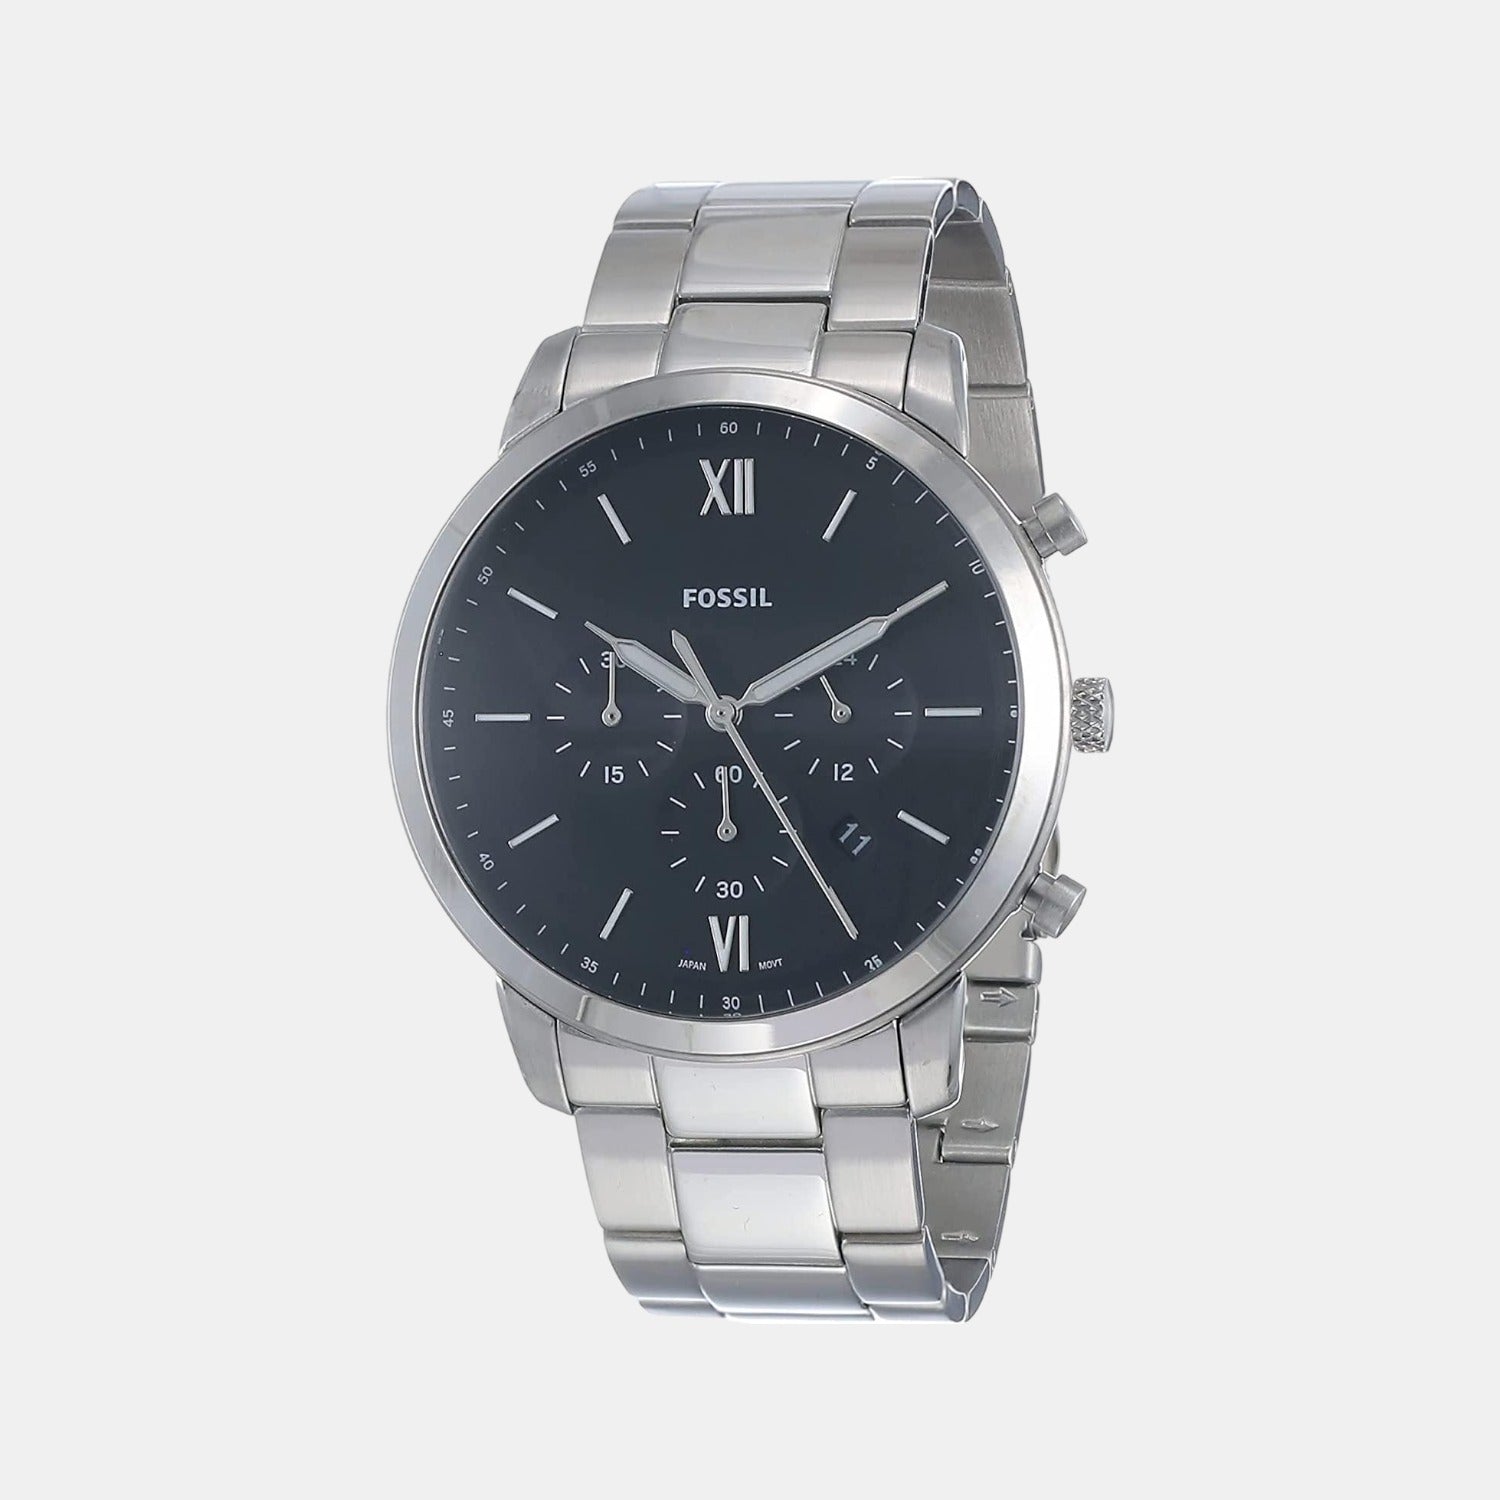 Fossil Male Black | Just In Steel Time Stainless Fossil – Watch Analog